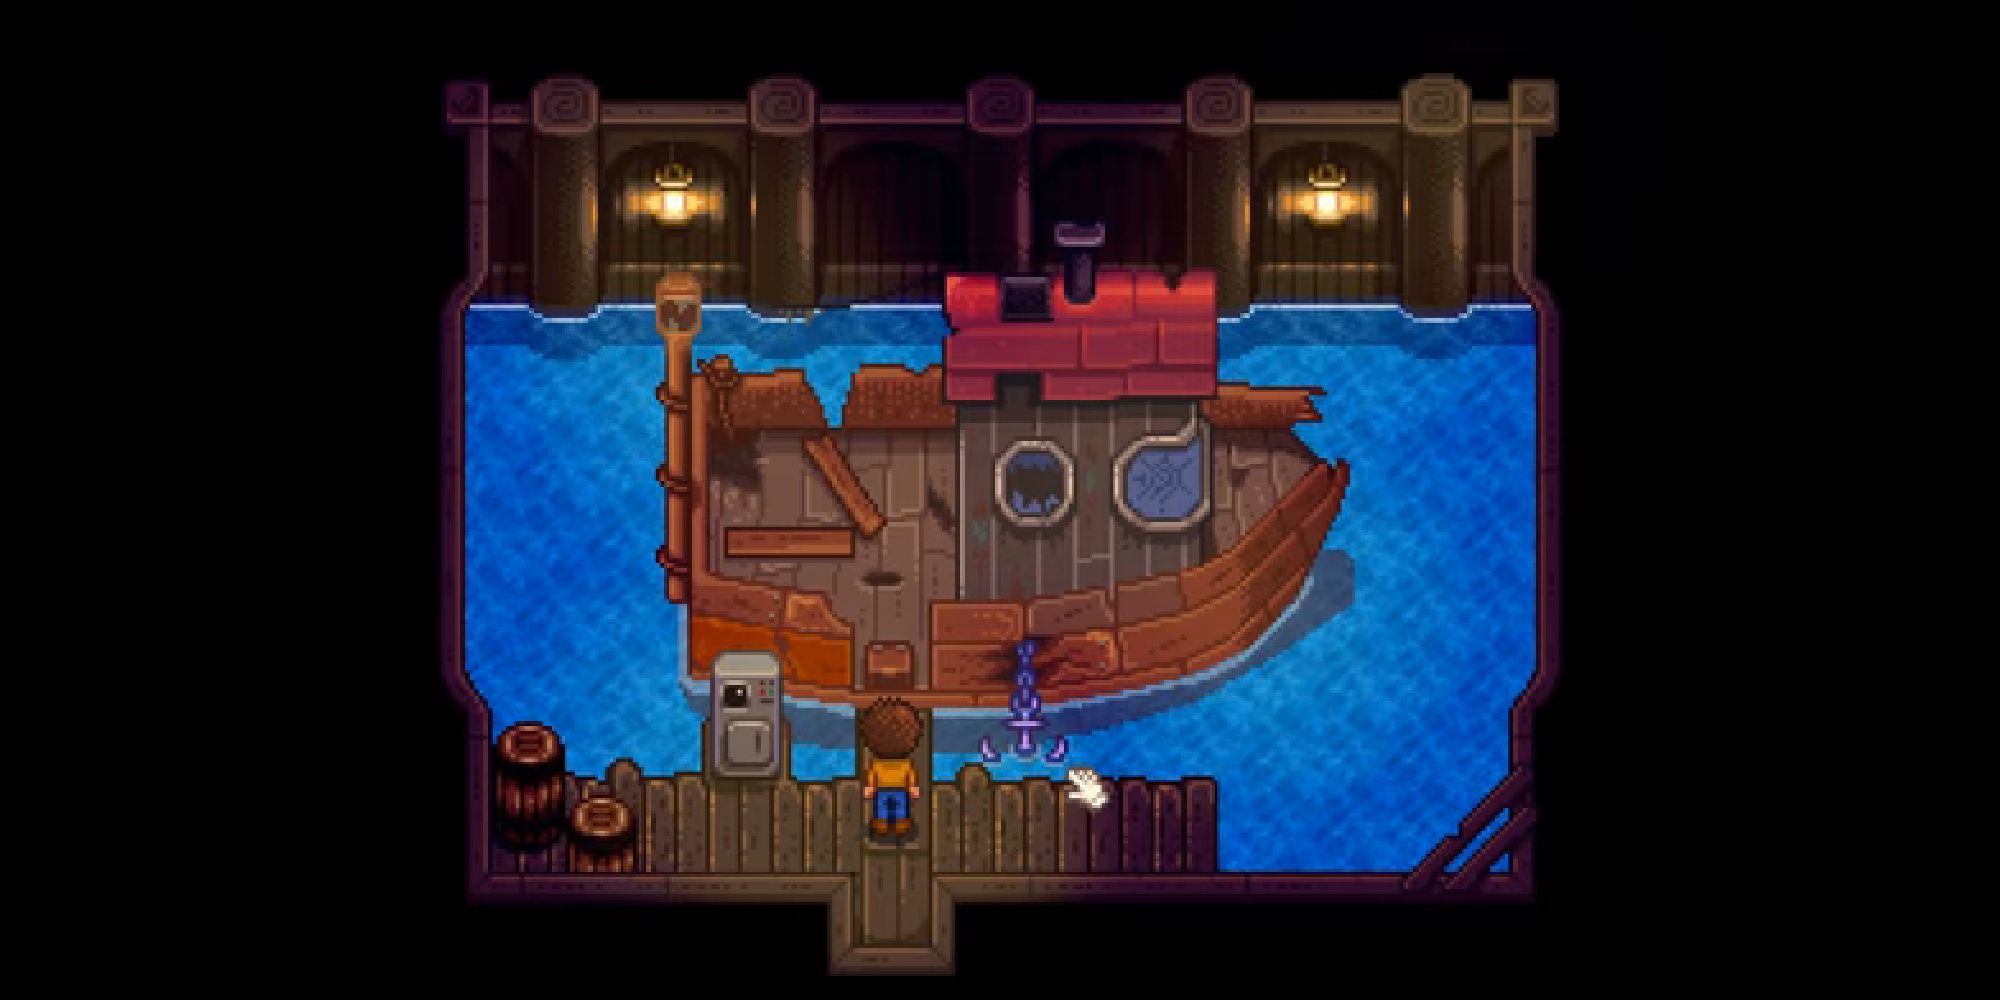 stardew island boat to ginger island with player standing nearby